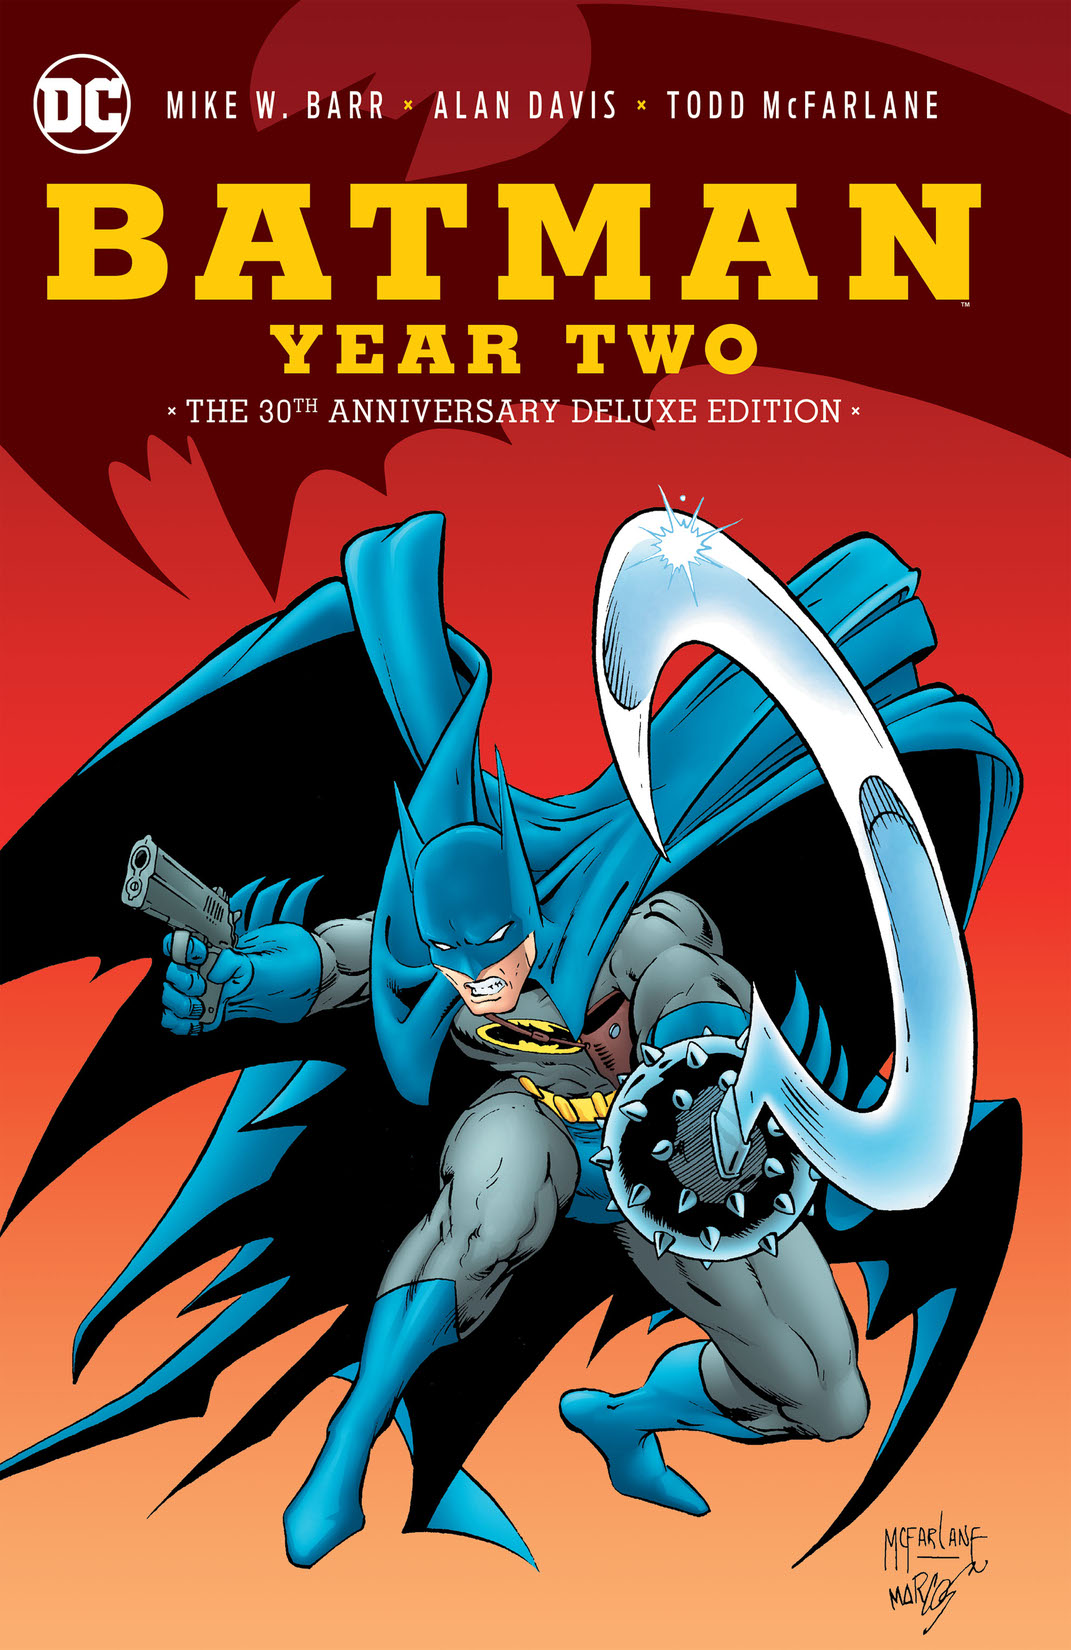 Batman: Year Two 30th Anniversary Deluxe Edition preview images